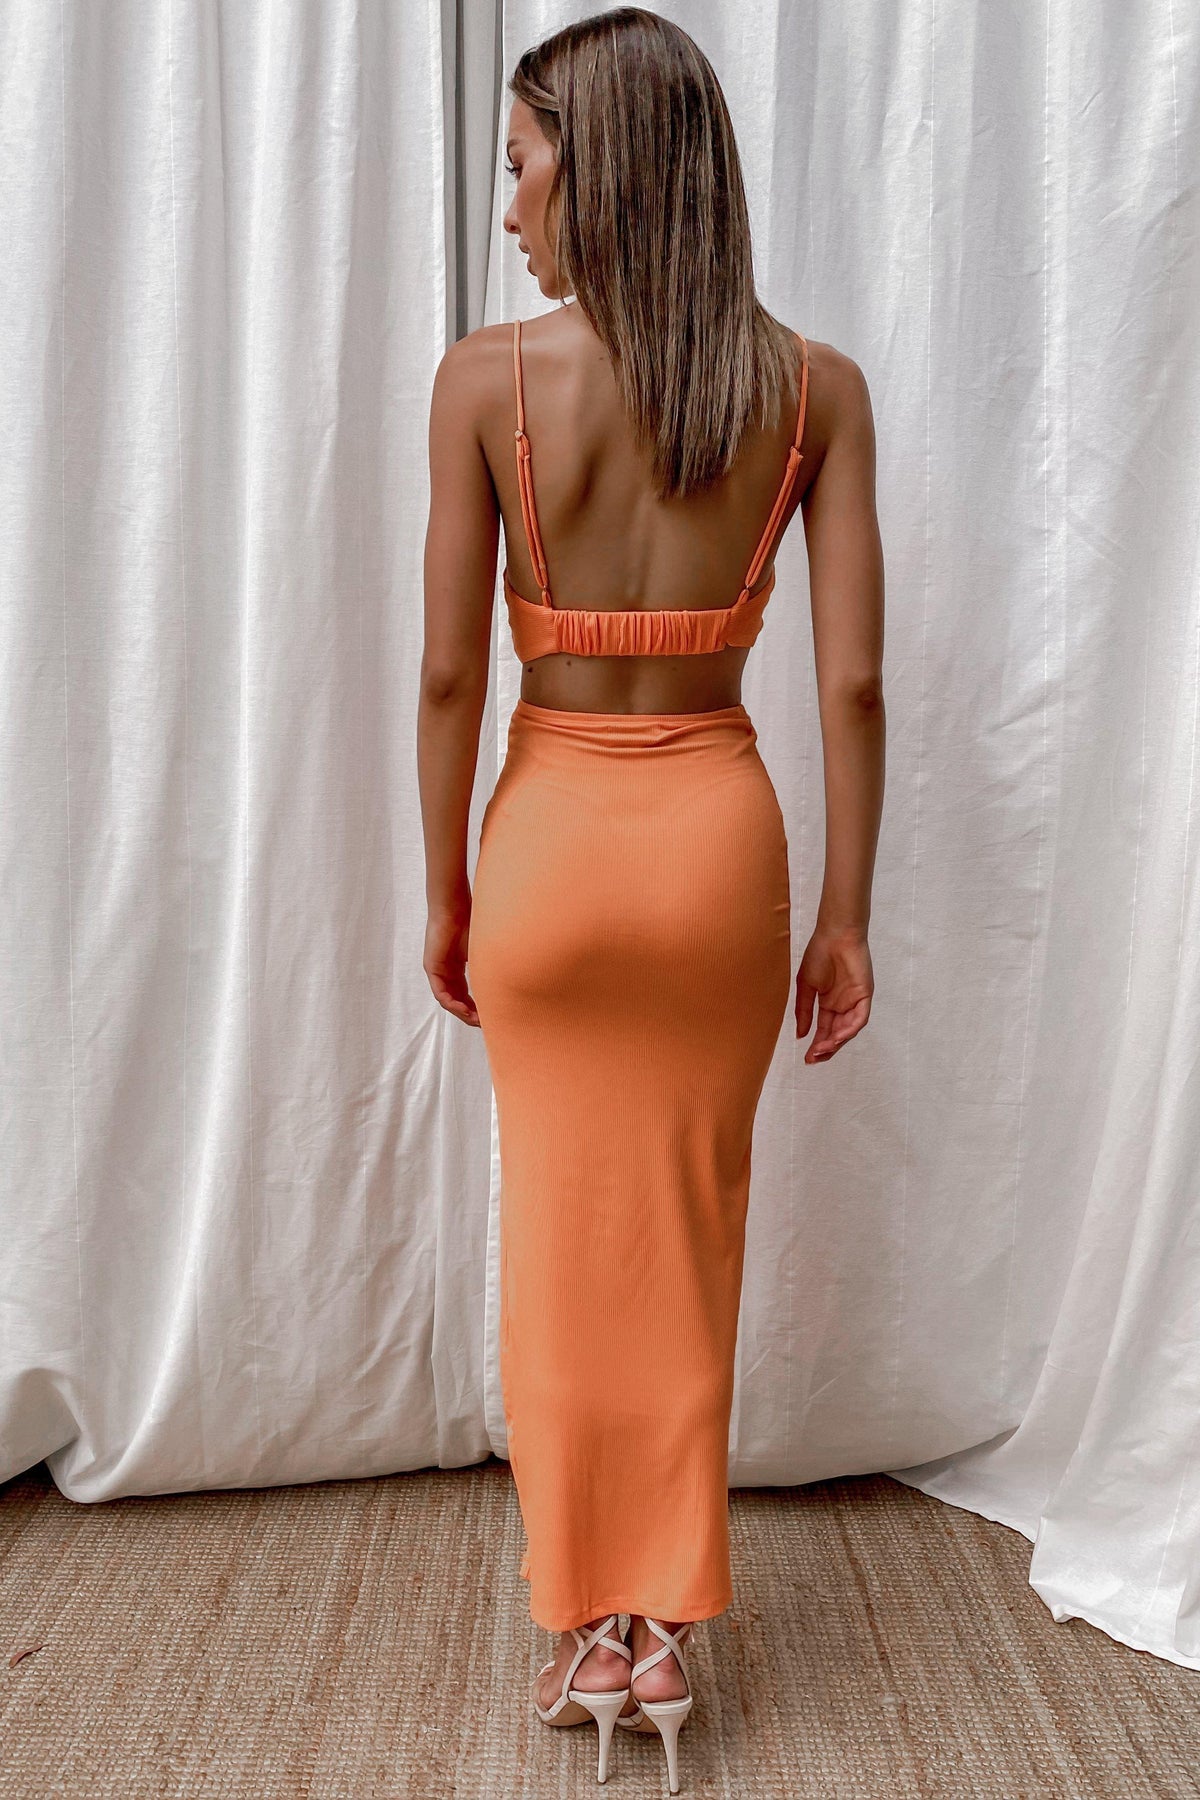 Alice Skirt, BOTTOMS, MAXI SKIRT, ORANGE, Sale, SKIRTS, Shop The Latest Alice Skirt Only 48.00 from MISHKAH FASHION:, Our New Alice Skirt is only $40.95-We Have The Latest Pants | Shorts | Skirts @ Mishkah Online Fashion Boutique-MISHKAH